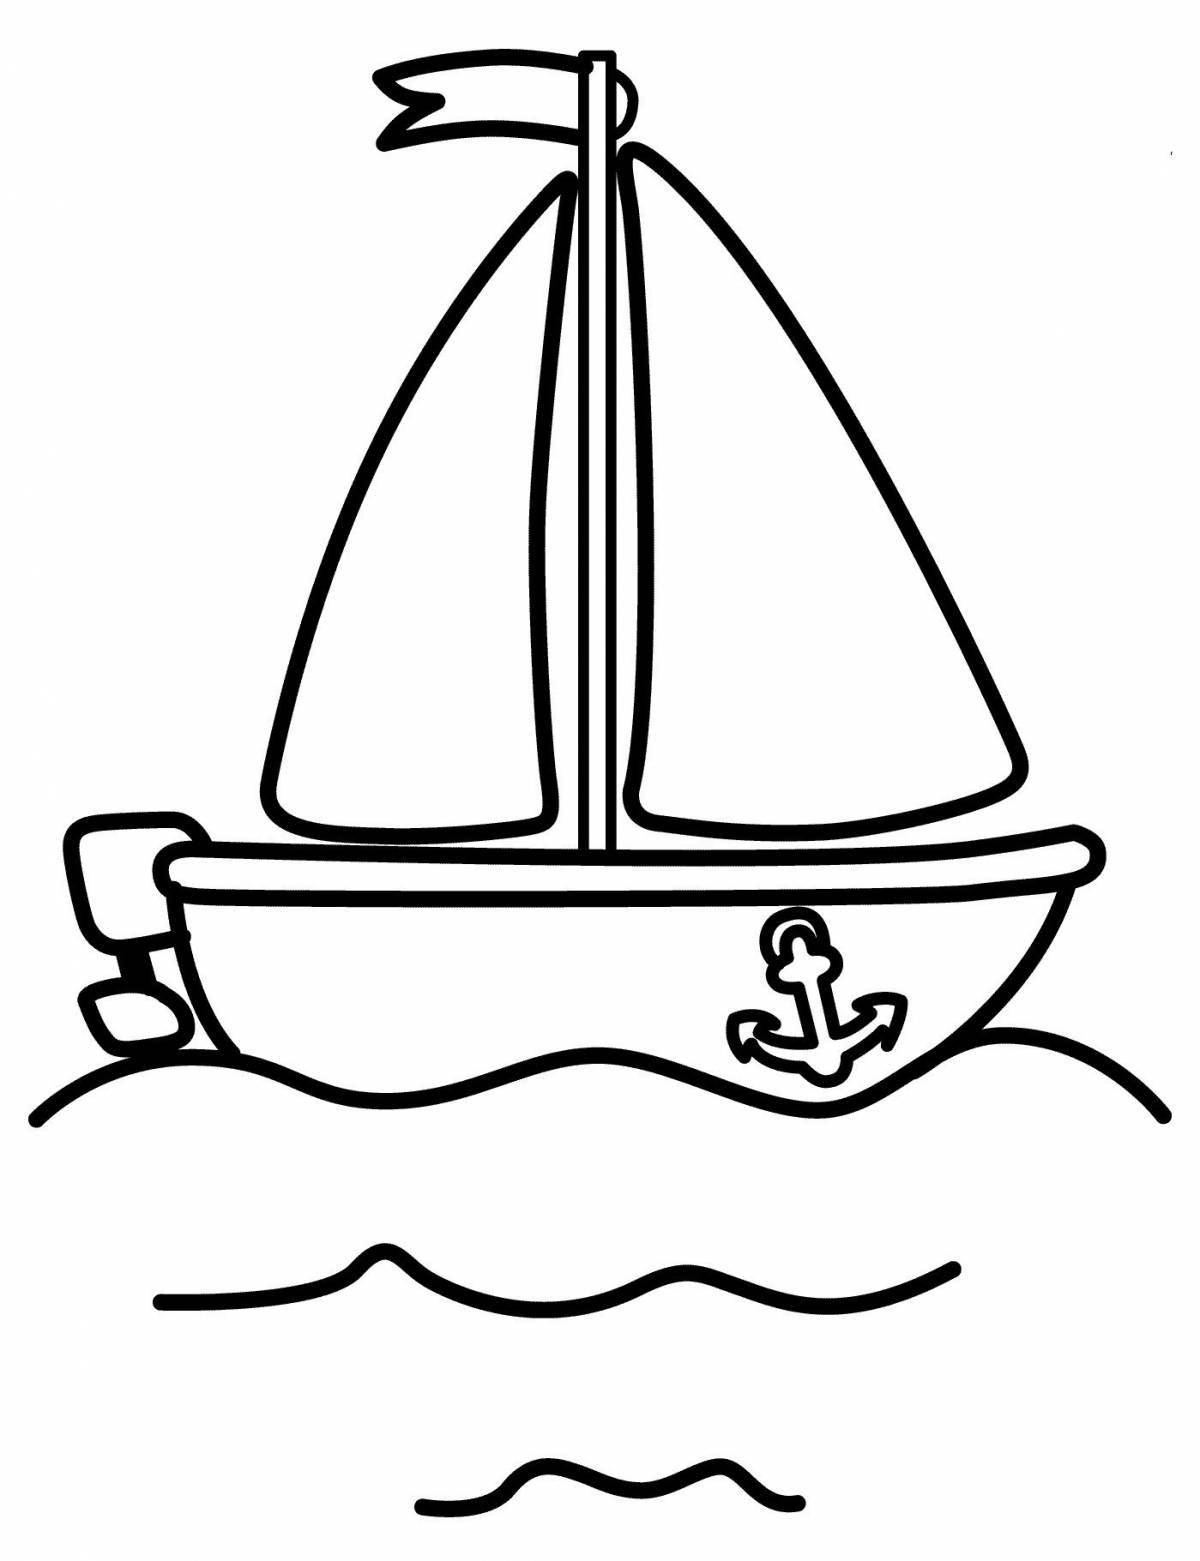 Colorful boat coloring page for 5-6 year olds